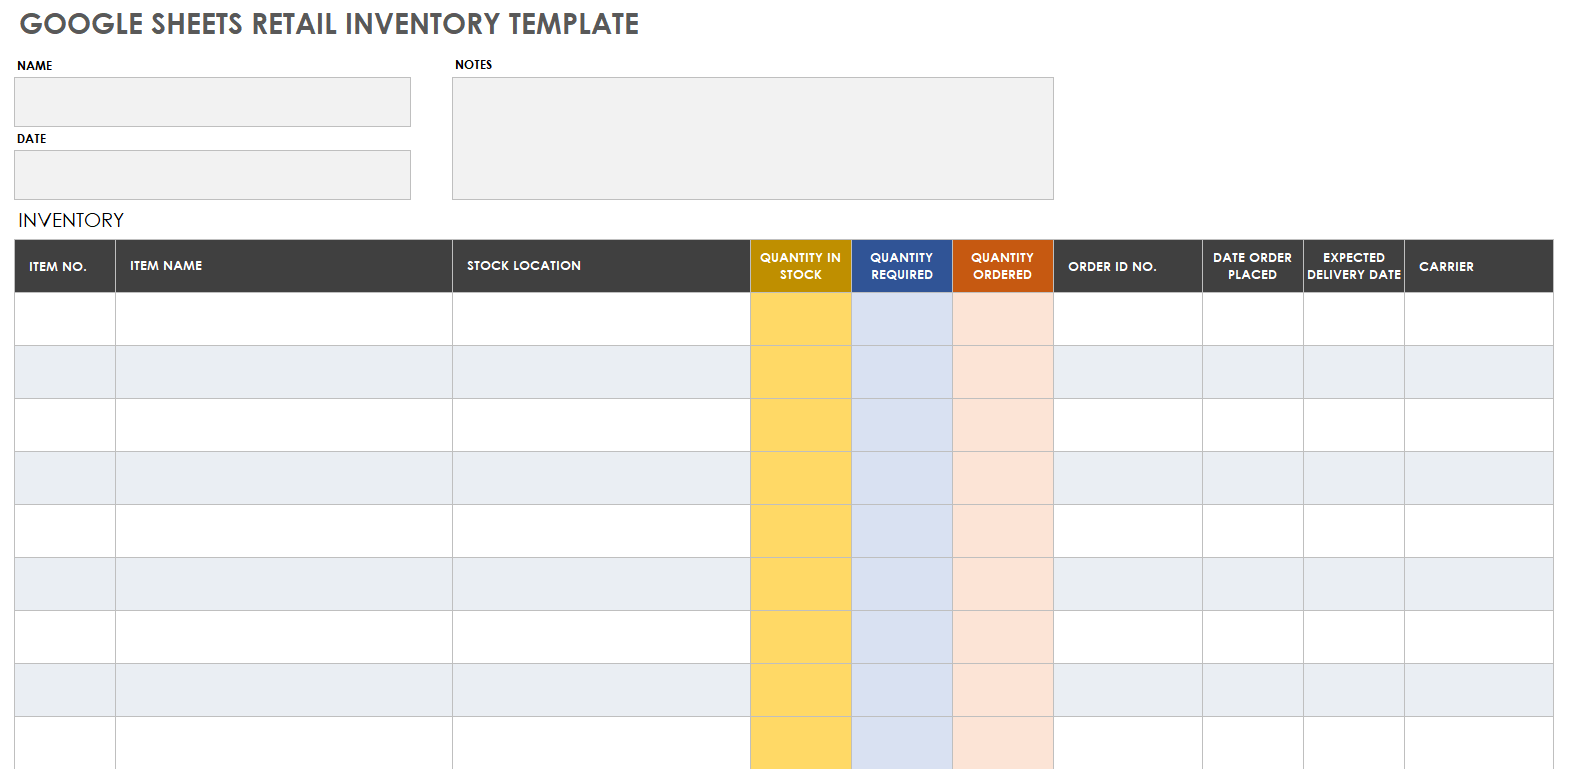 Google Sheets Retail Inventory Template